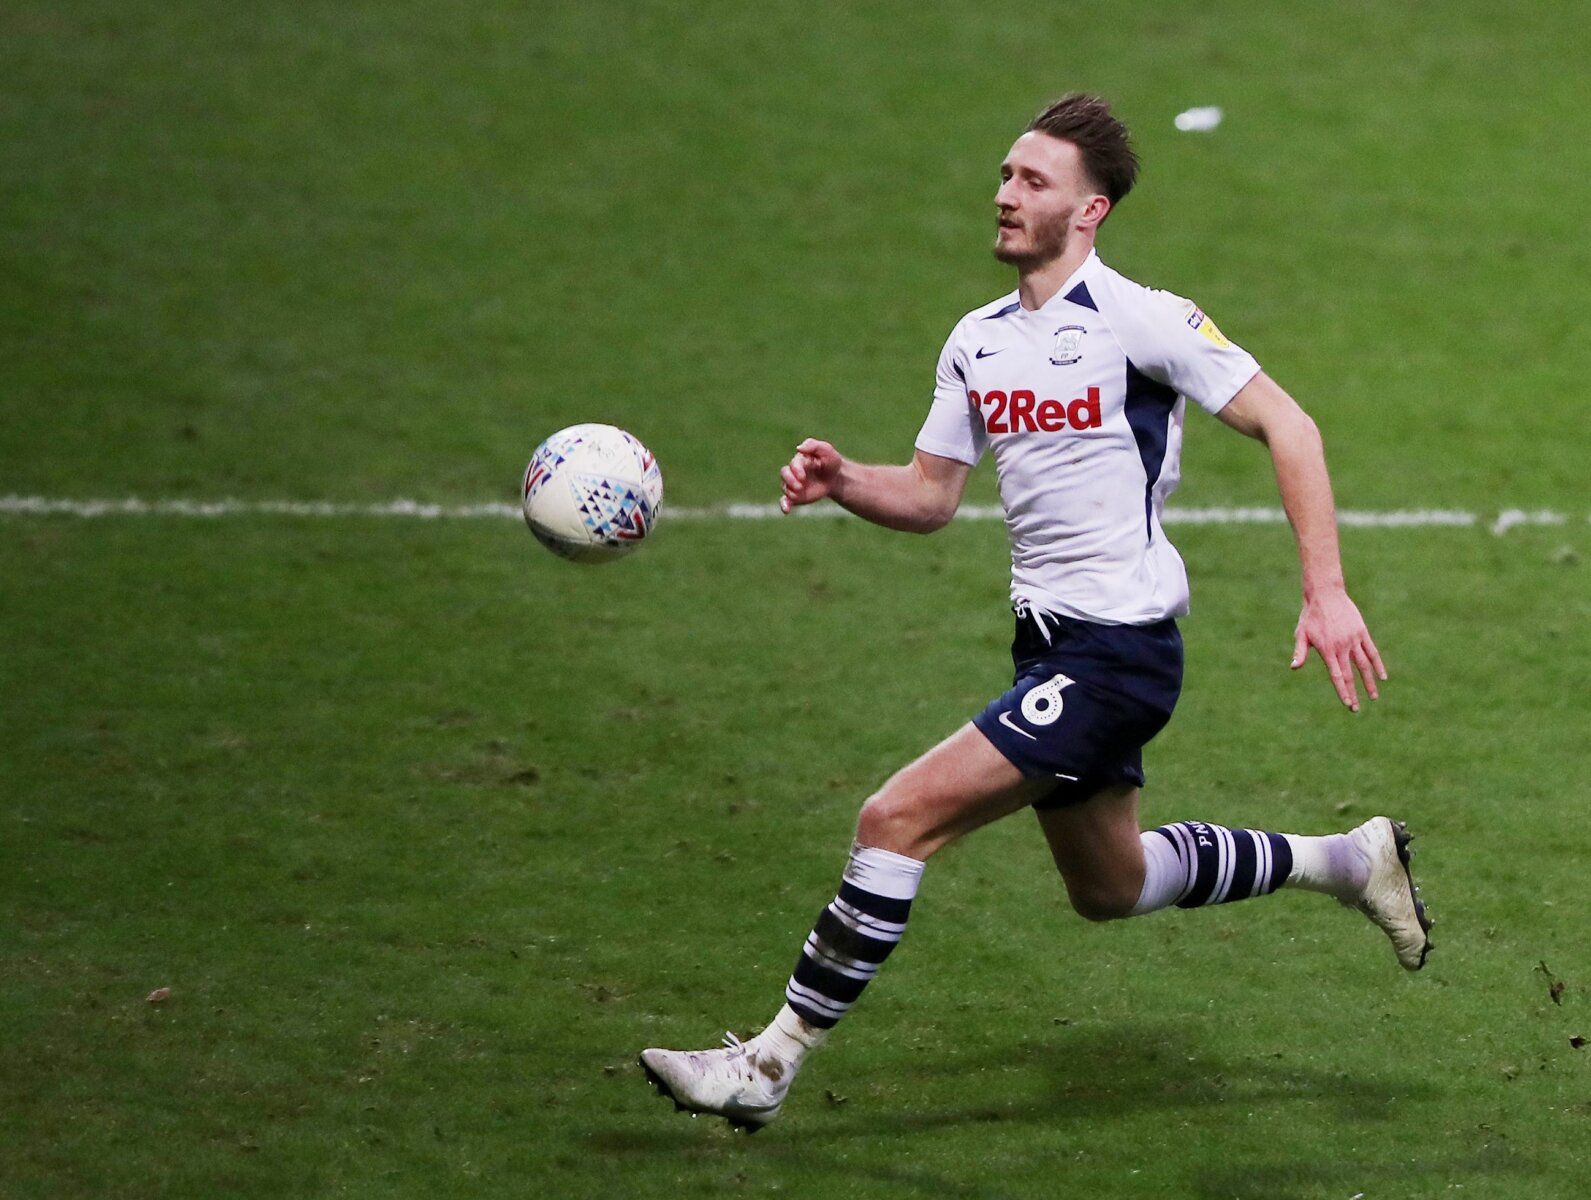 Soccer Football - Championship - Preston North End v Swansea City - Deepdale, Preston, Britain - February 1, 2020   Preston North End's Ben Davies in action   Action Images/Molly Darlington    EDITORIAL USE ONLY. No use with unauthorized audio, video, data, fixture lists, club/league logos or 